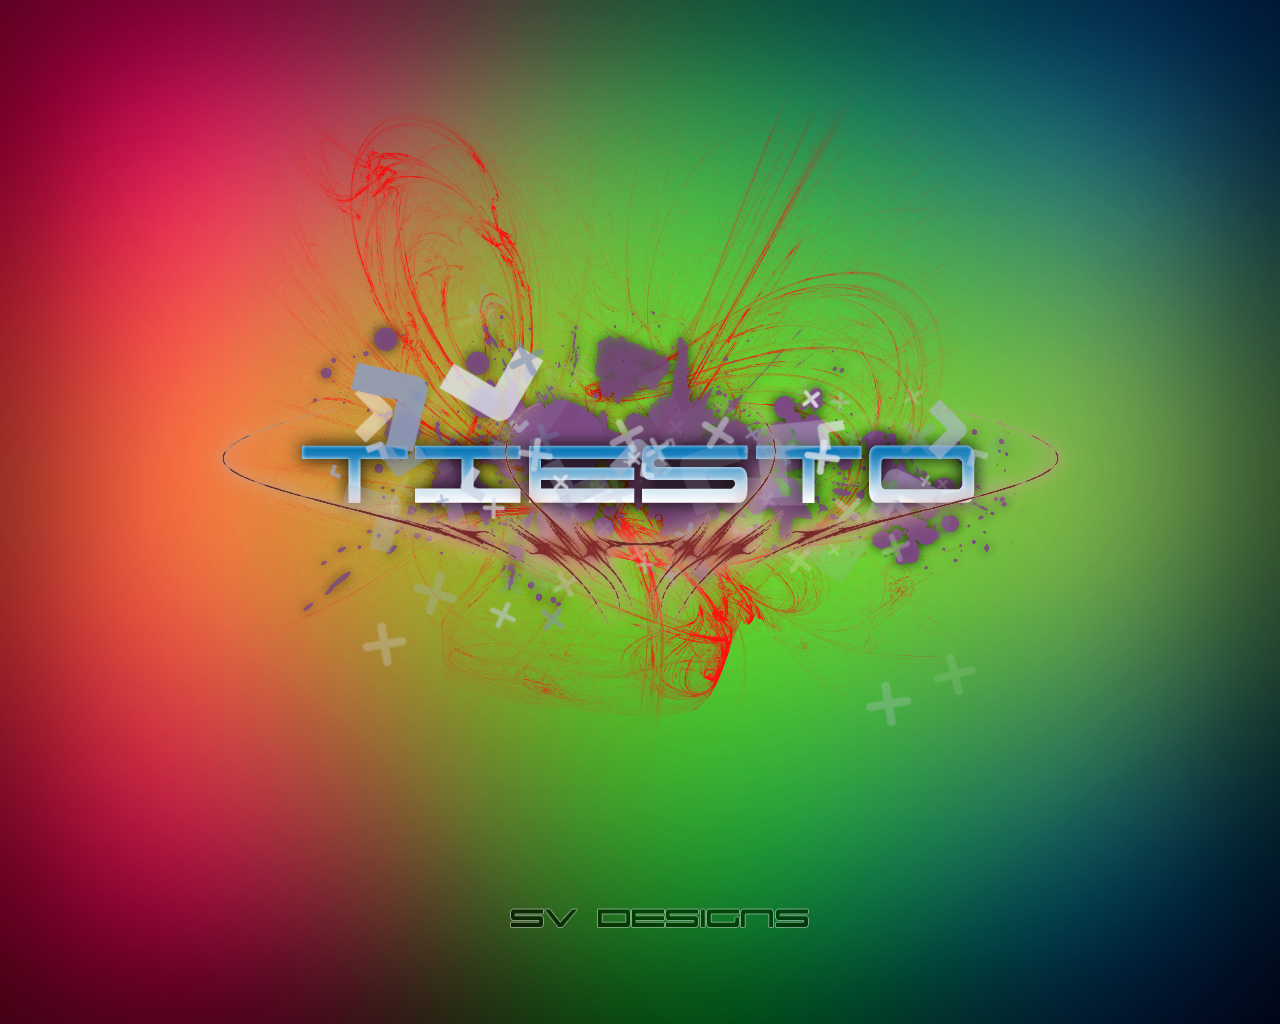  wallpaper other 2009 2015 shilpinator a tiesto wallpaper was just